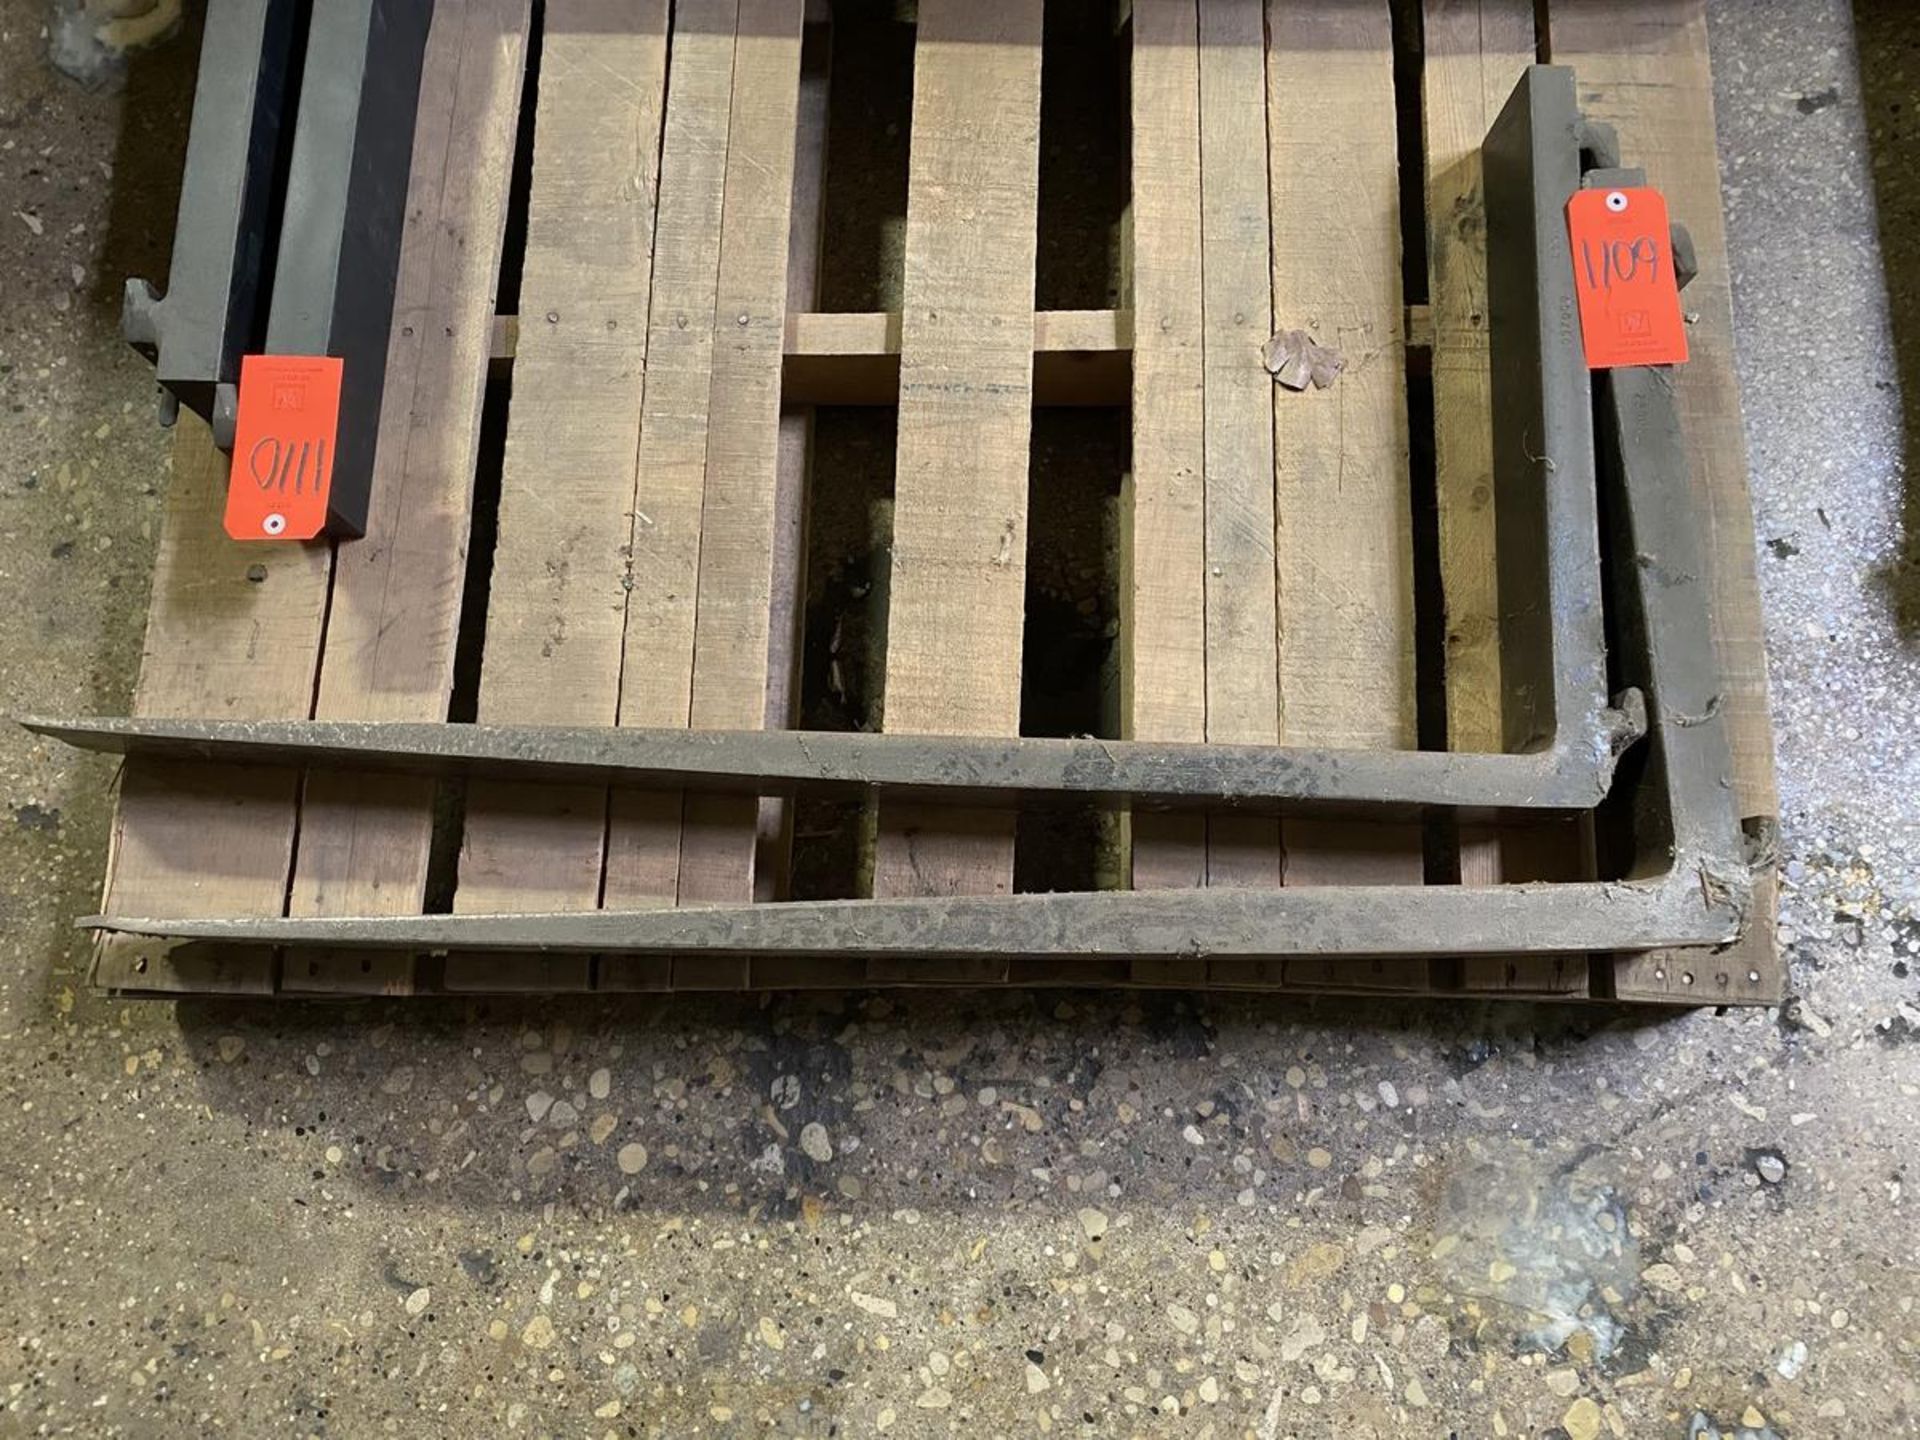 Set of 40 in. Forklift Forks - (Located In: Bedford Park, IL)